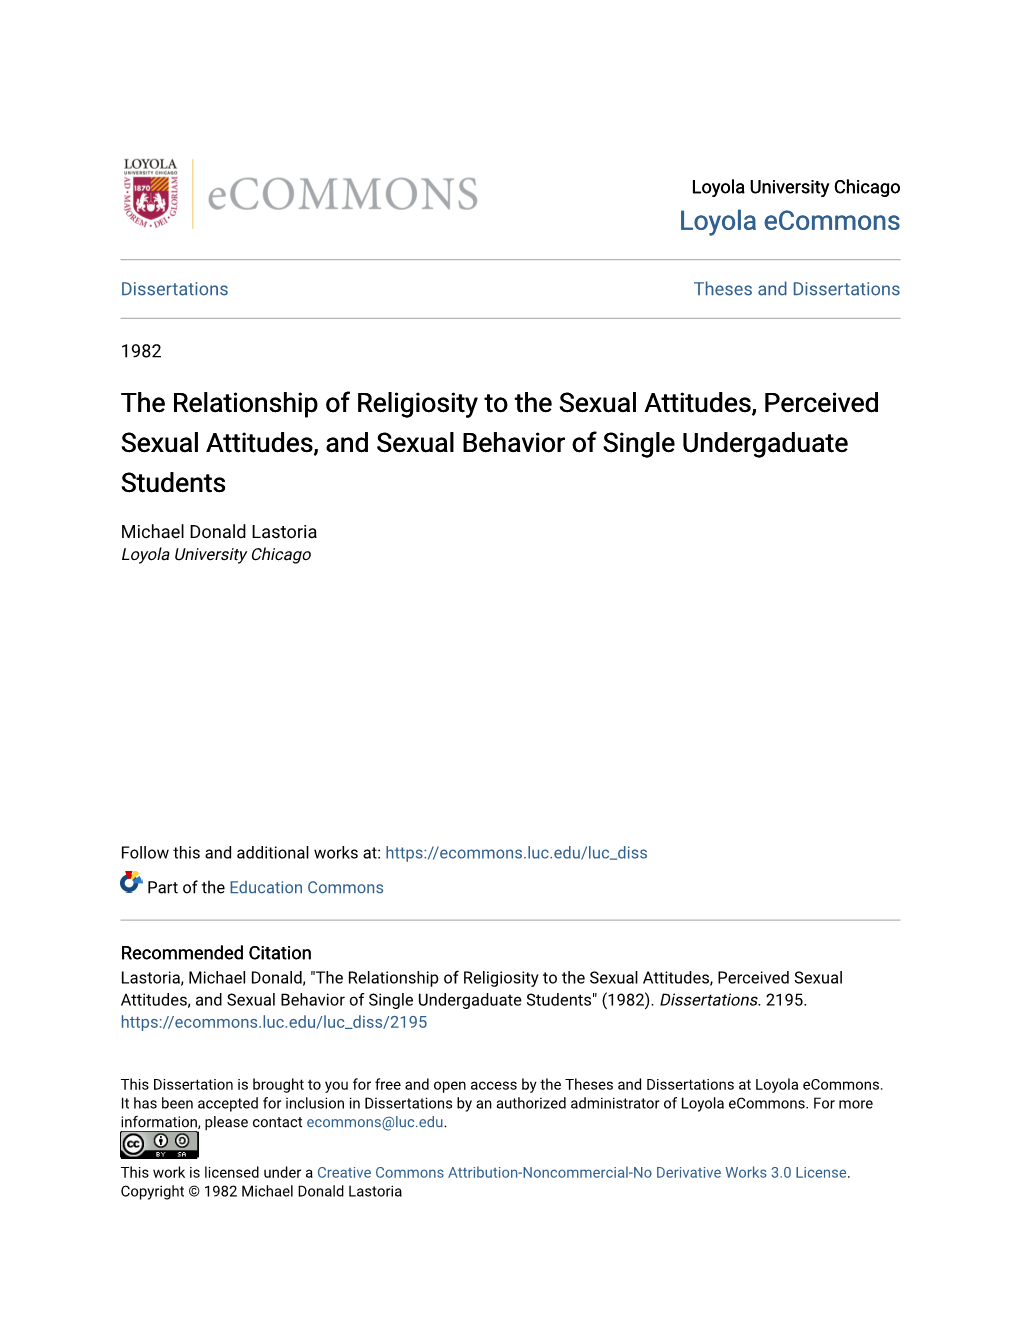 The Relationship of Religiosity to the Sexual Attitudes, Perceived Sexual Attitudes, and Sexual Behavior of Single Undergaduate Students